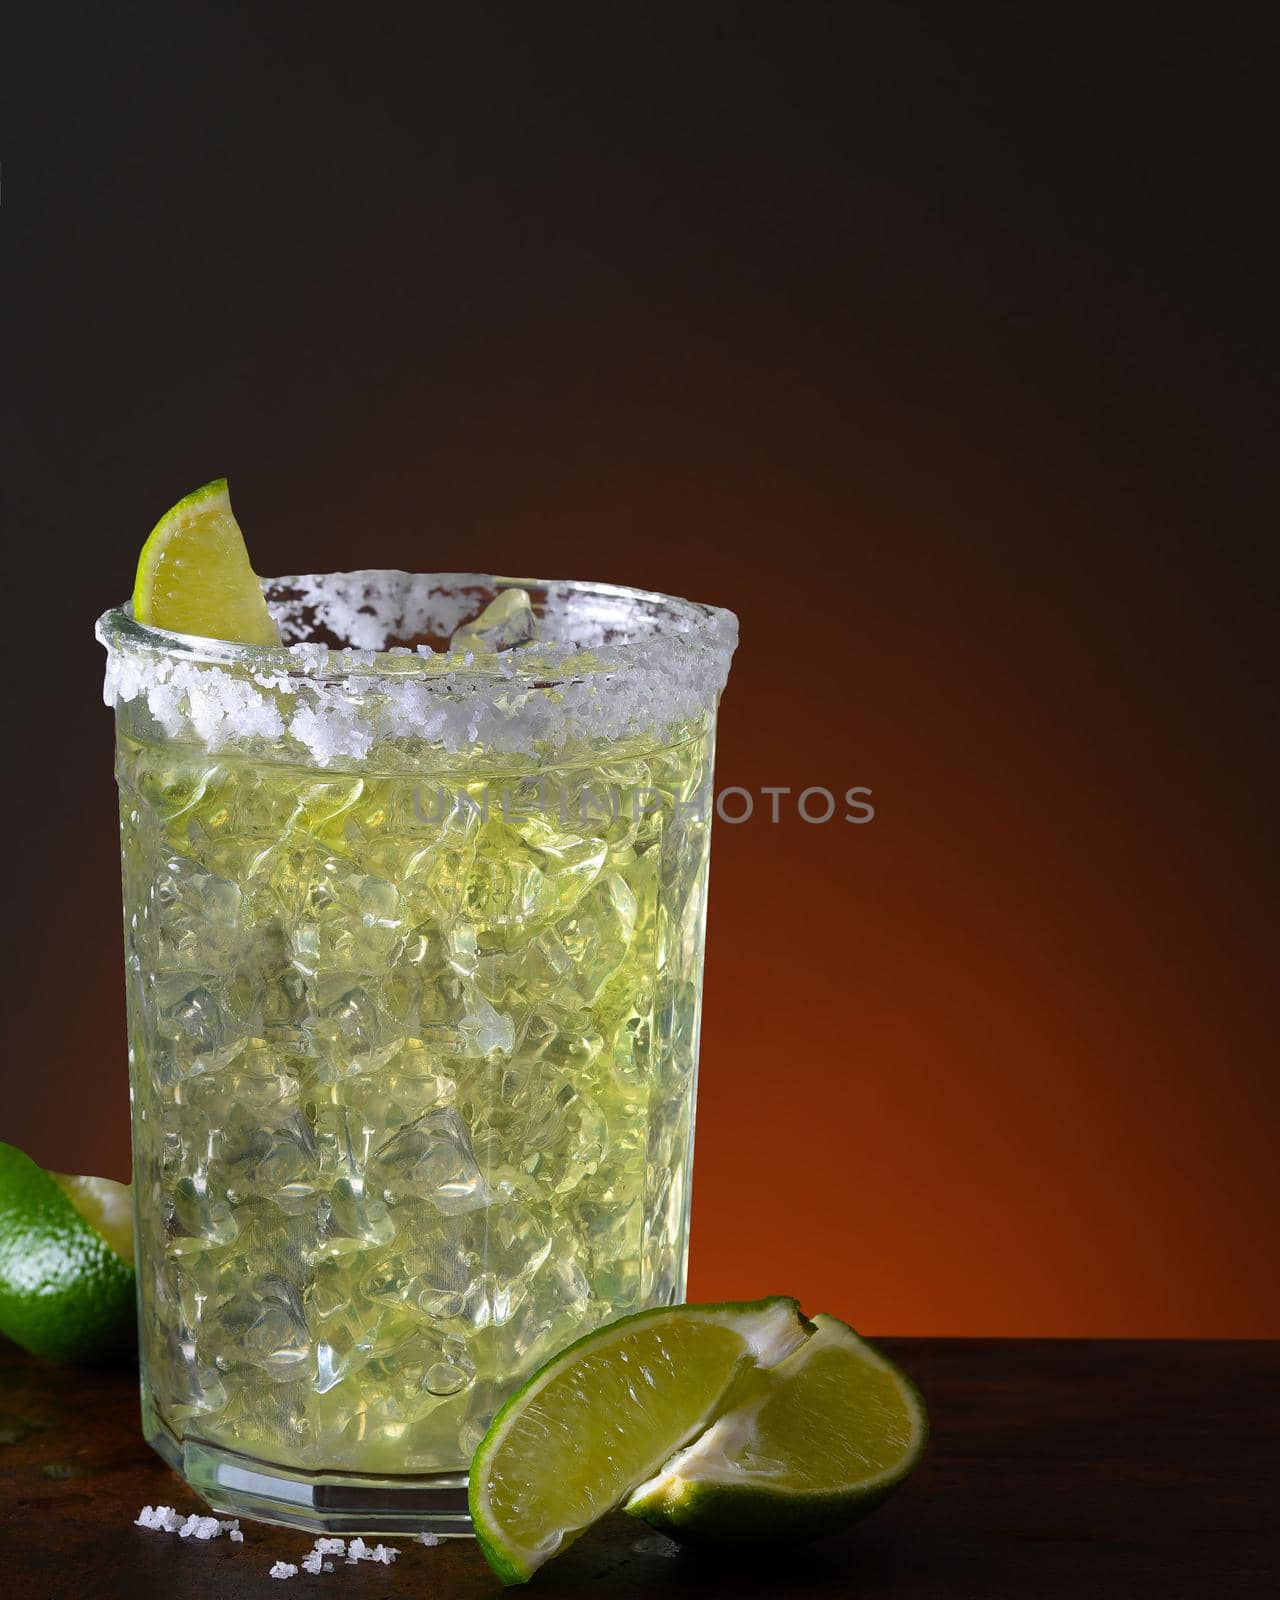 A margarita on the rocks in a glass tumbler. On a dark wood table with a warn light to dark background with copy space.